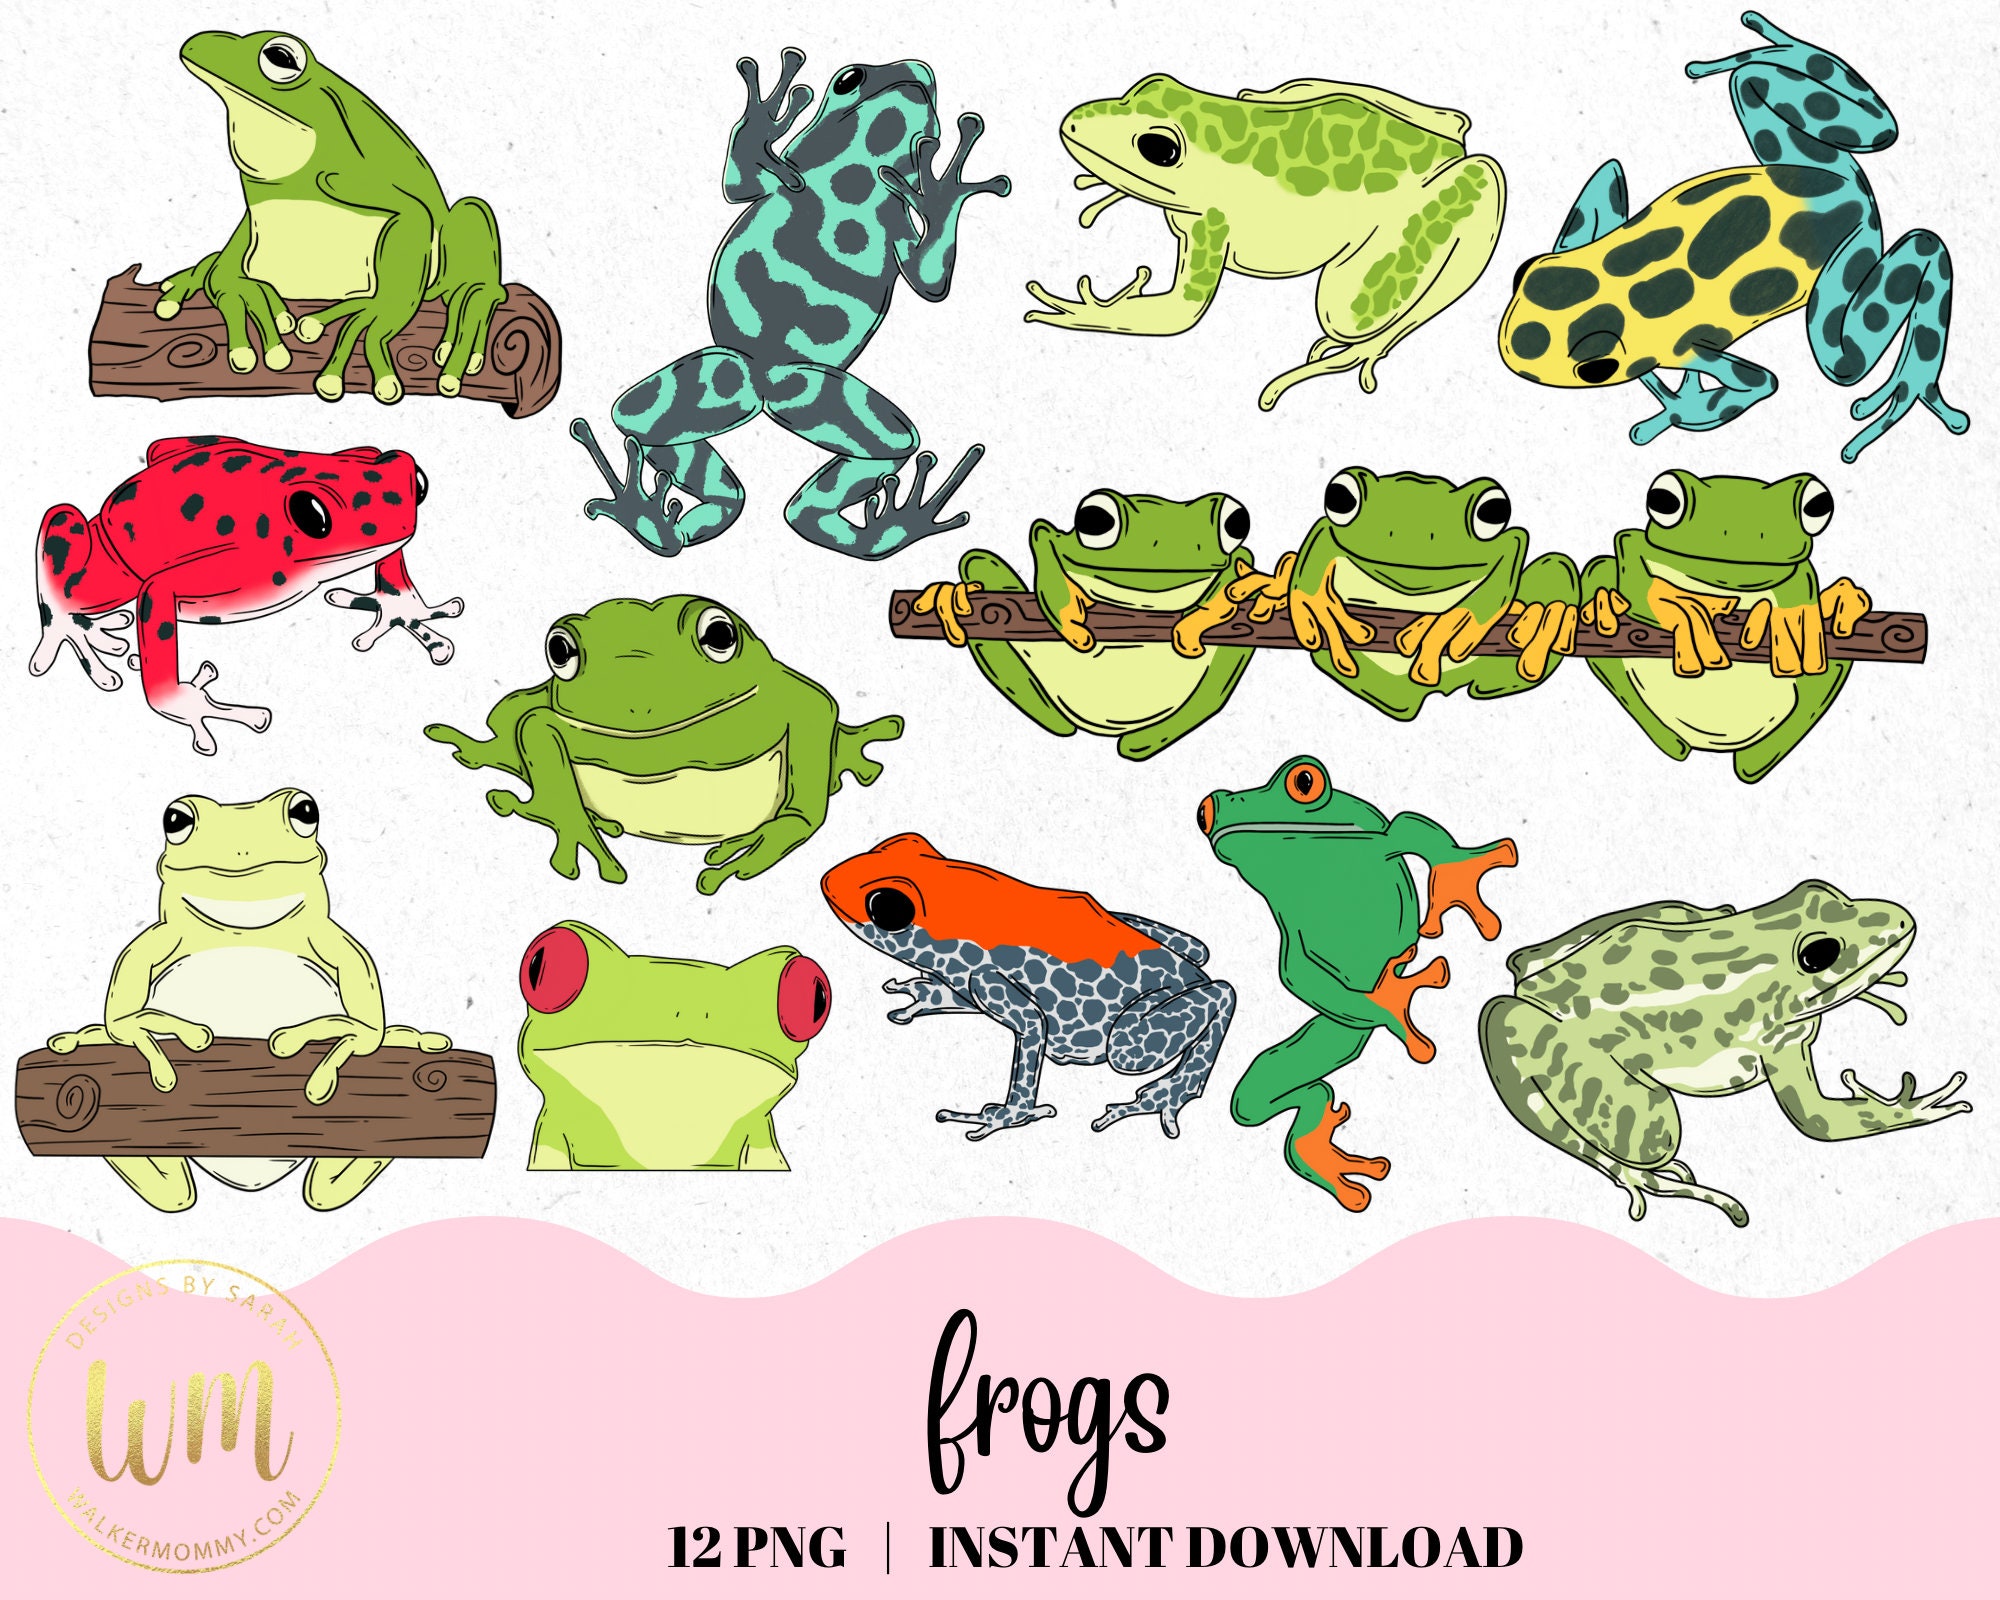 210 Blue frog stuff ideas  frog, photographing artwork, wholesale